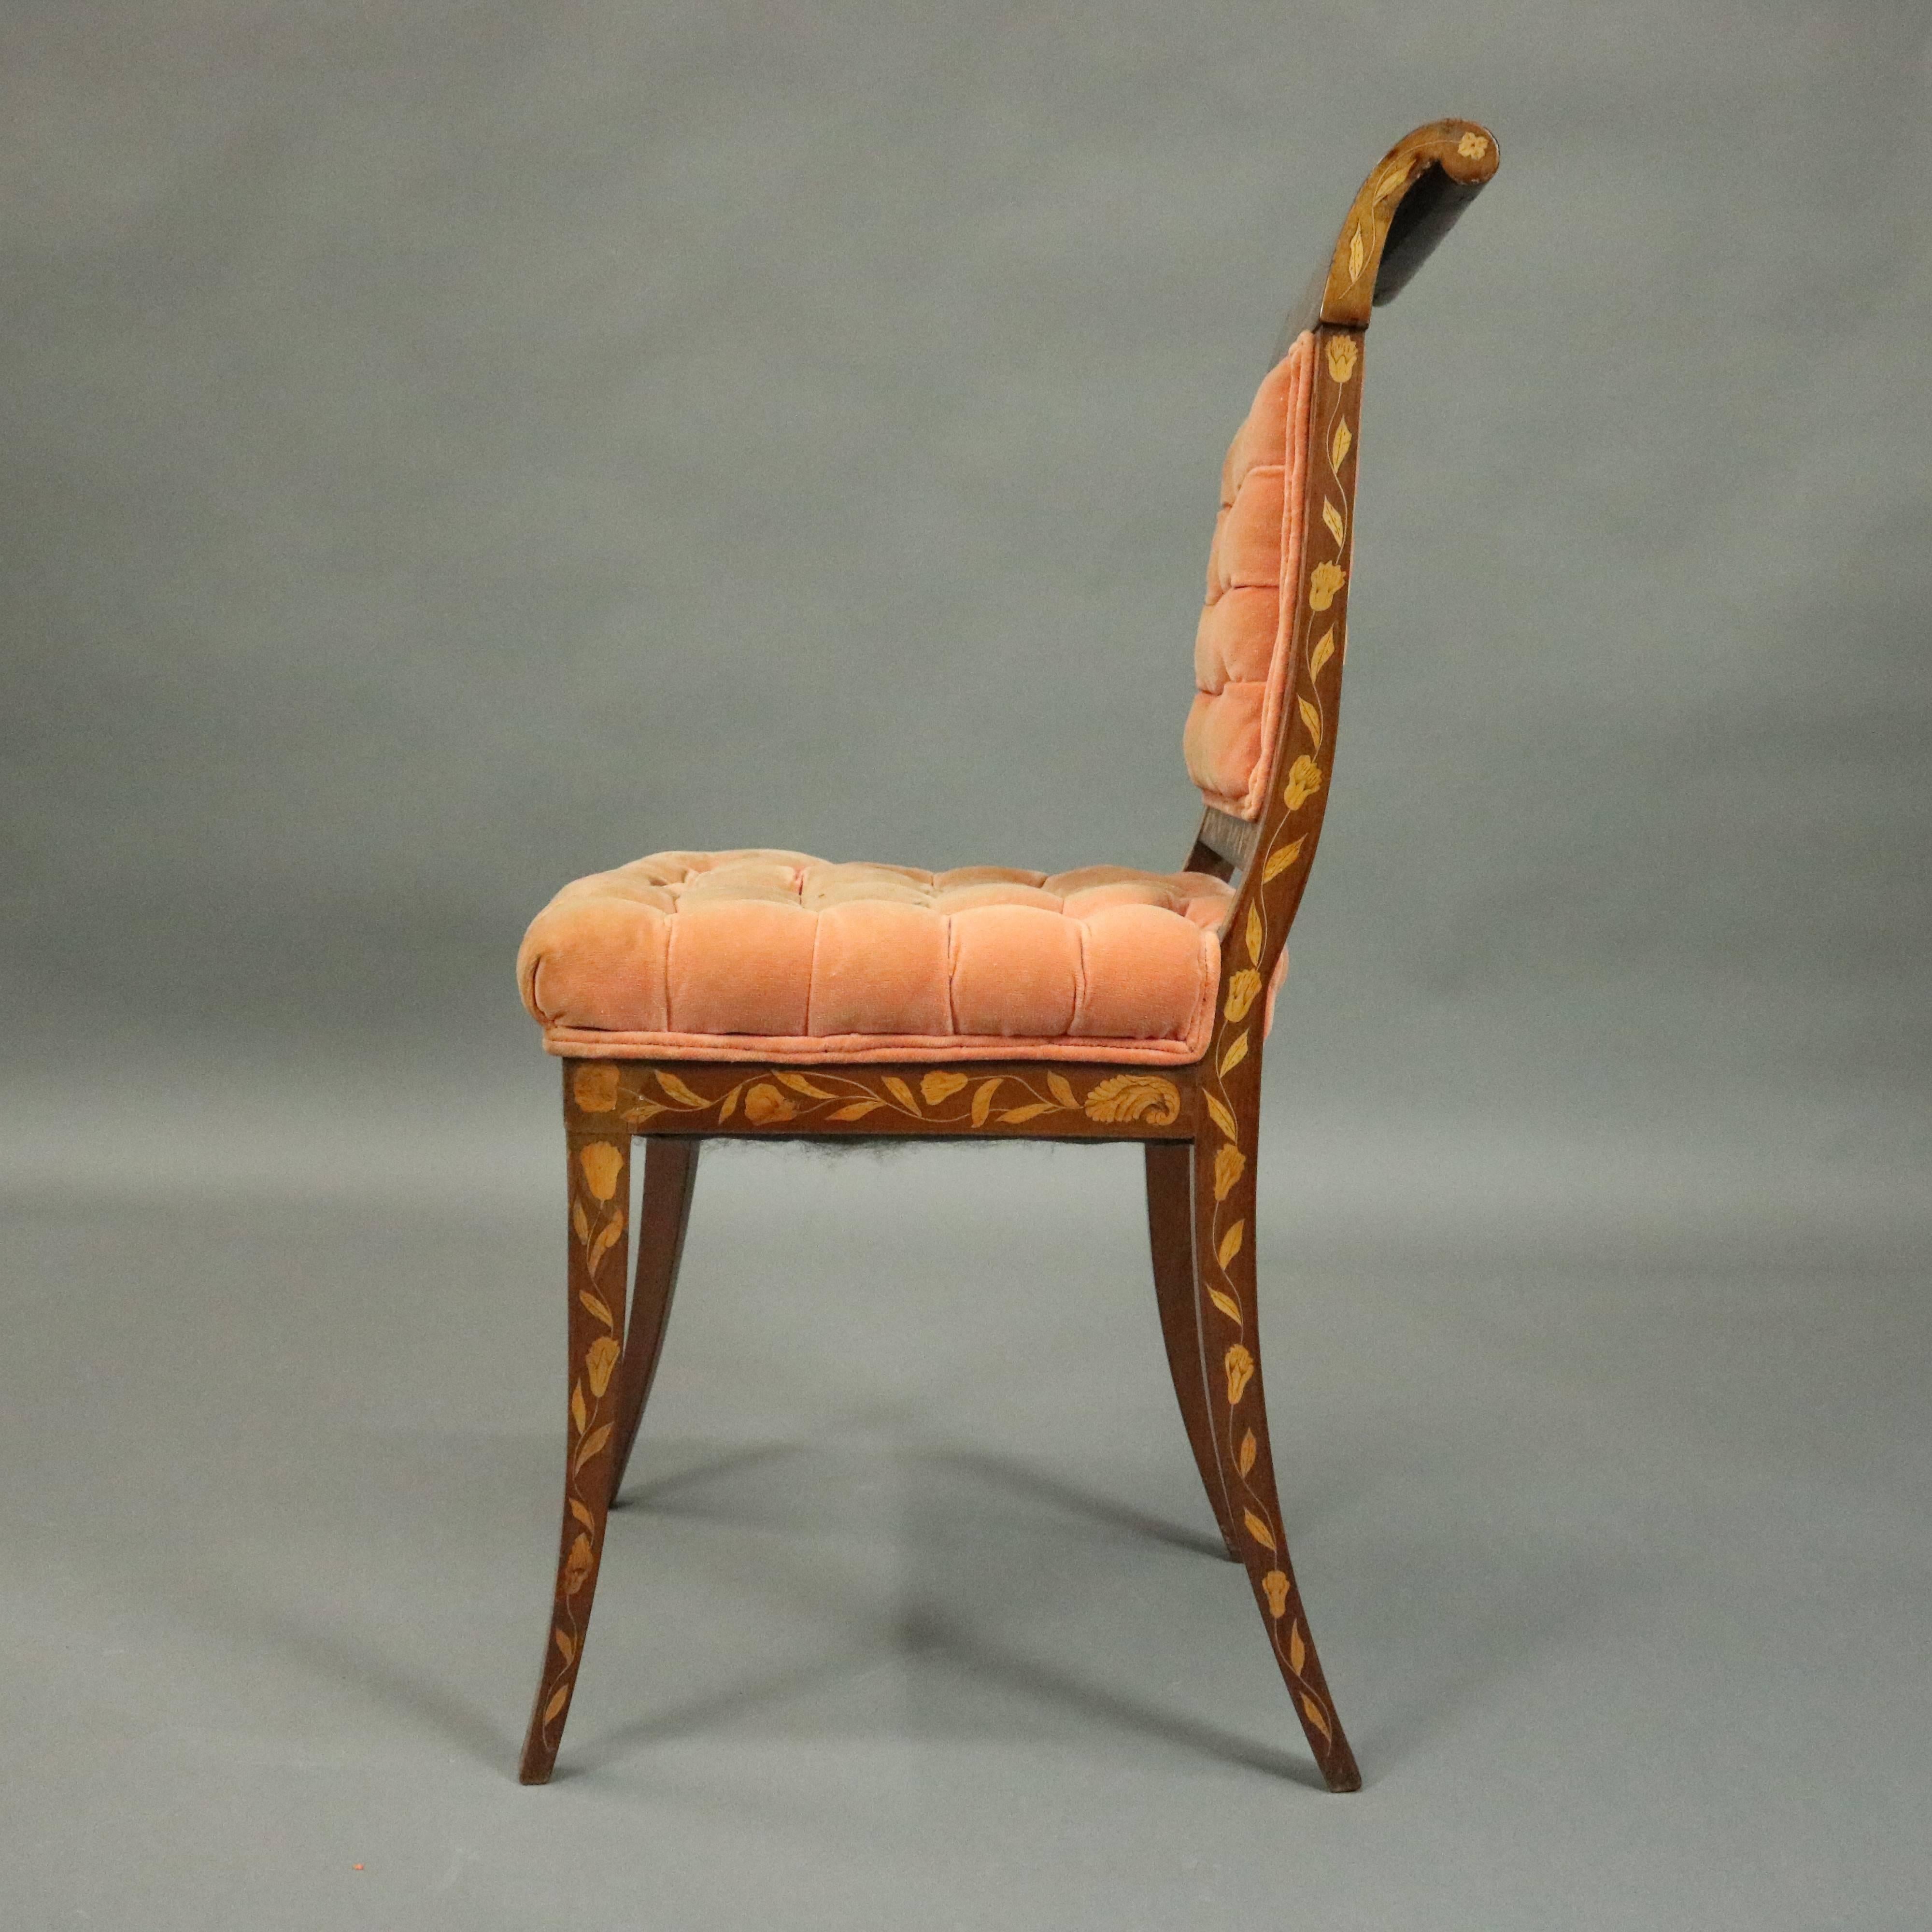 European Dutch Marquetry Upholstered Mahogany Side Chair with Foliate Inlay, circa 1890